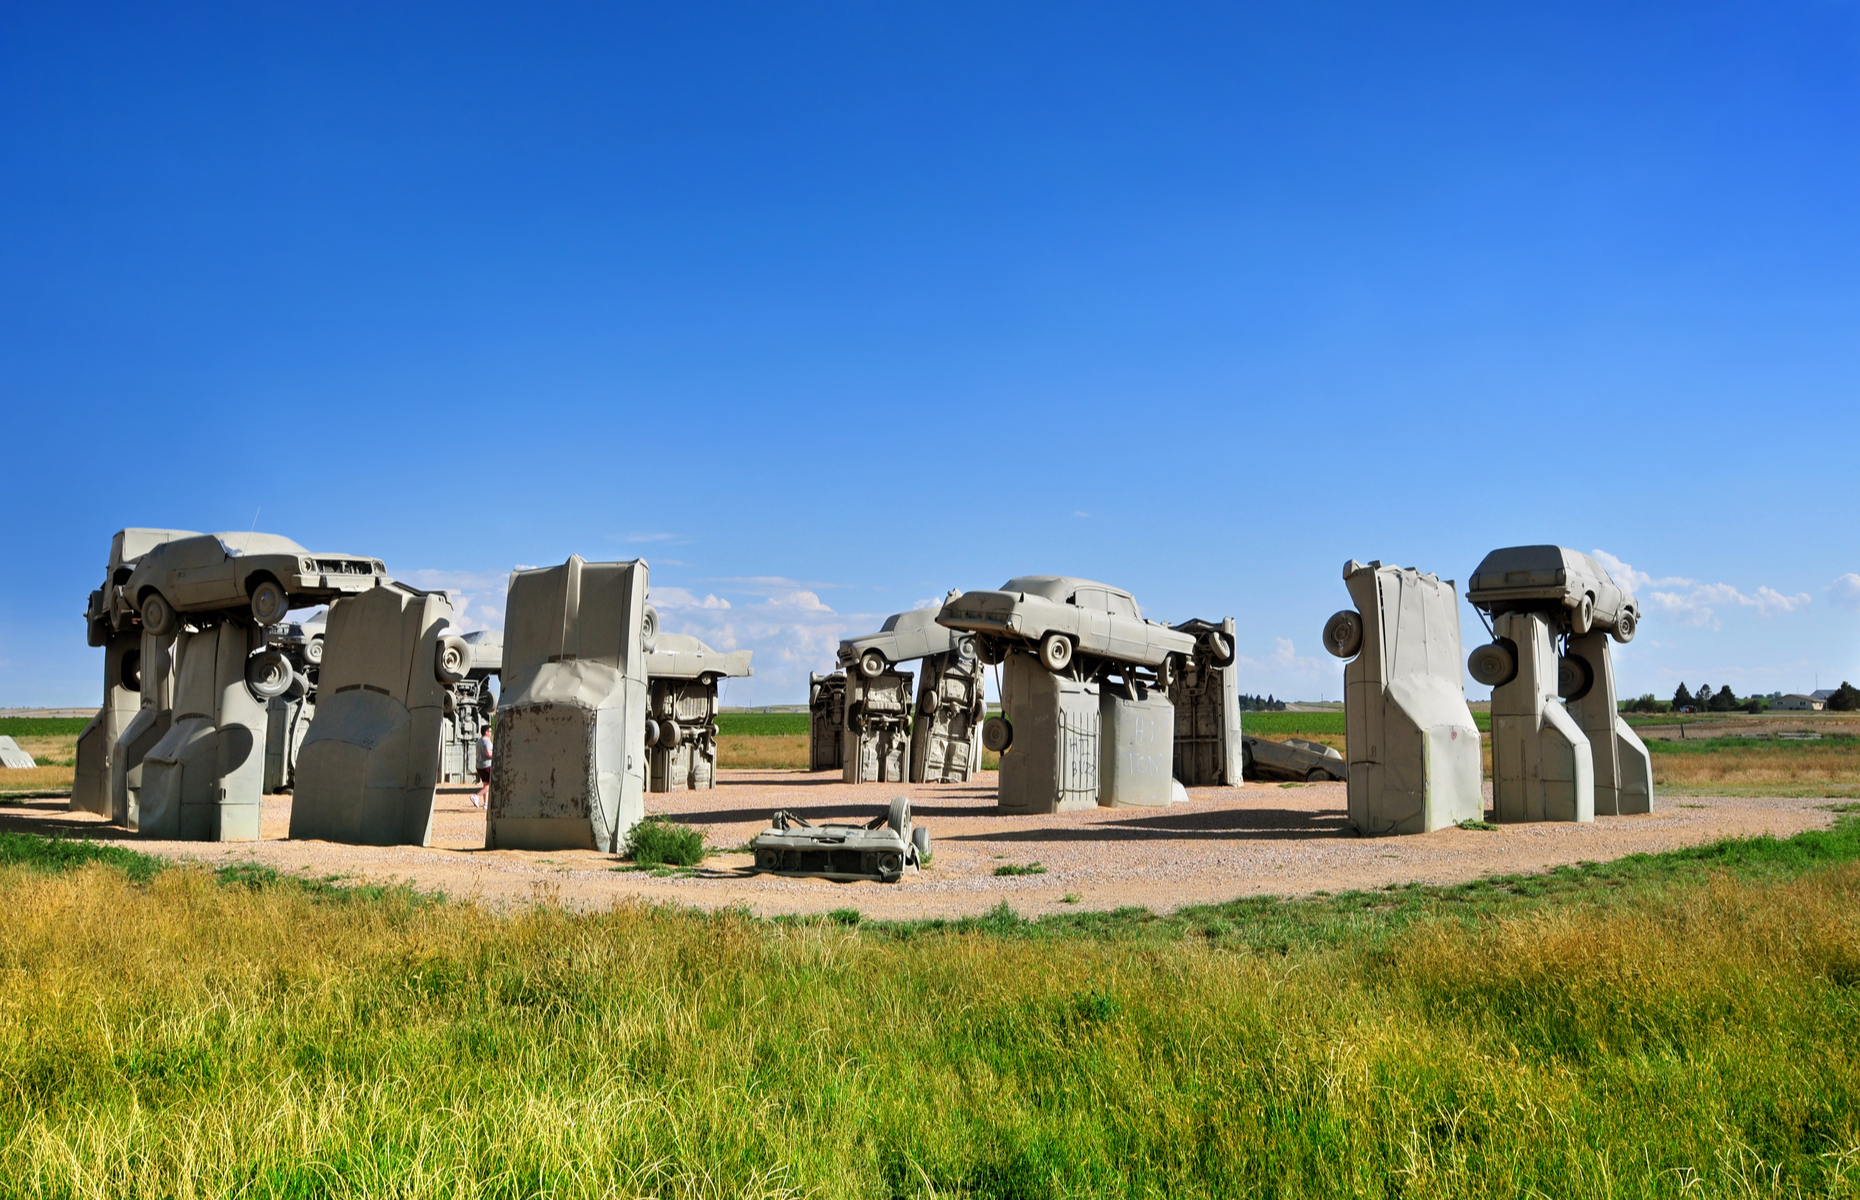 <p class="p1"><span>The Cornhusker State isn’t just cornfields and football. It’s also home to one of the most bizarre roadside attractions in the country: <a href="https://www.atlasobscura.com/places/carhenge" rel="noreferrer noopener"><span>Carhenge</span></a>, which, as you may have guessed, is a replica of England’s Stonehenge—only instead of stones, it’s made up of 38 vehicles, including an ambulance. Carhenge was built in 1987 by Jim Reinders with the help of his family to commemorate his late father. </span></p>